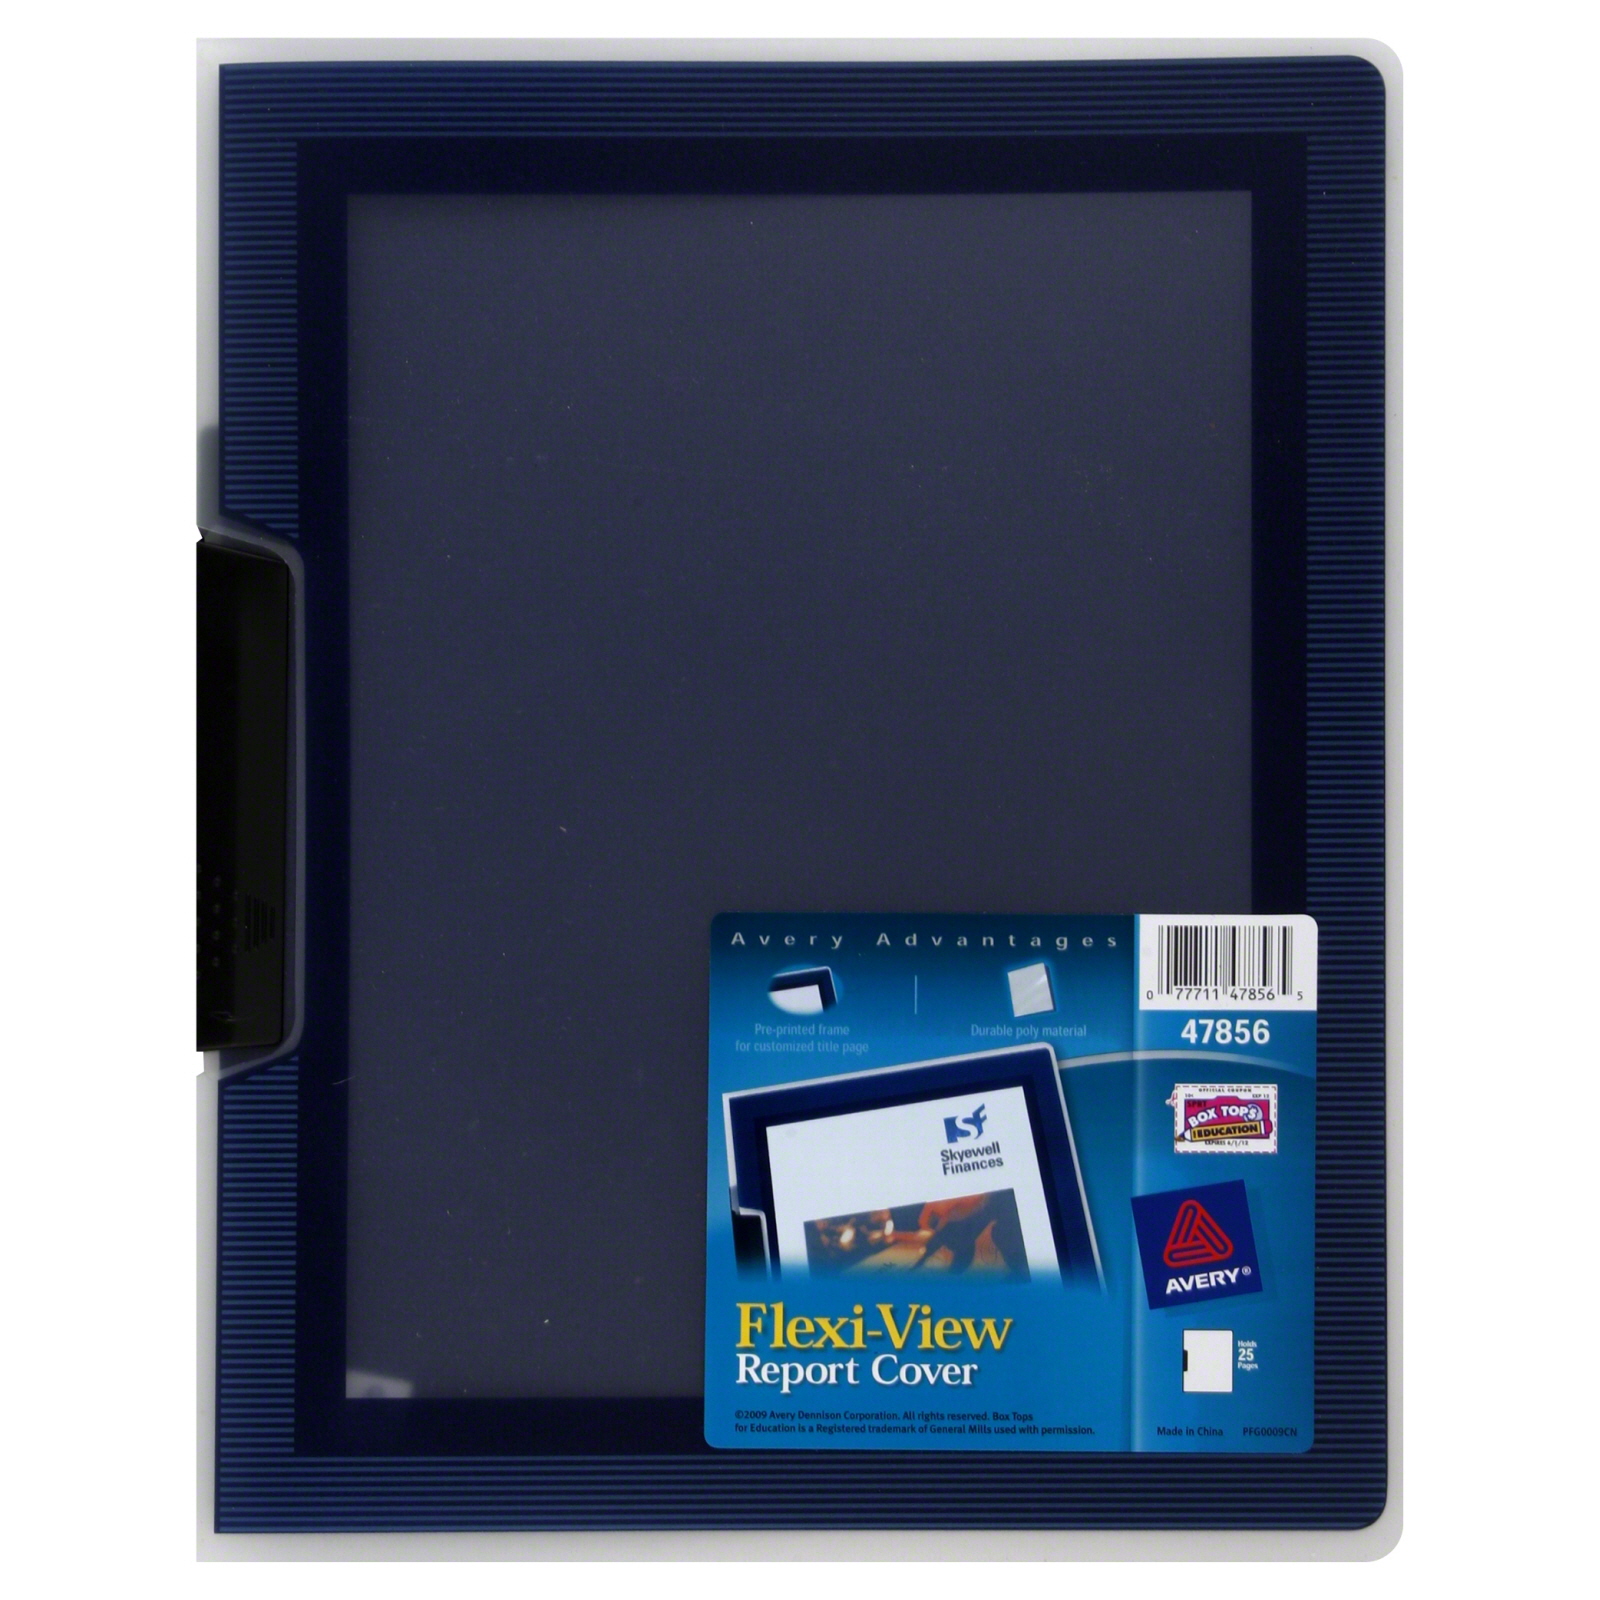 Avery 81498611b Flexi-View Report Cover, Blue